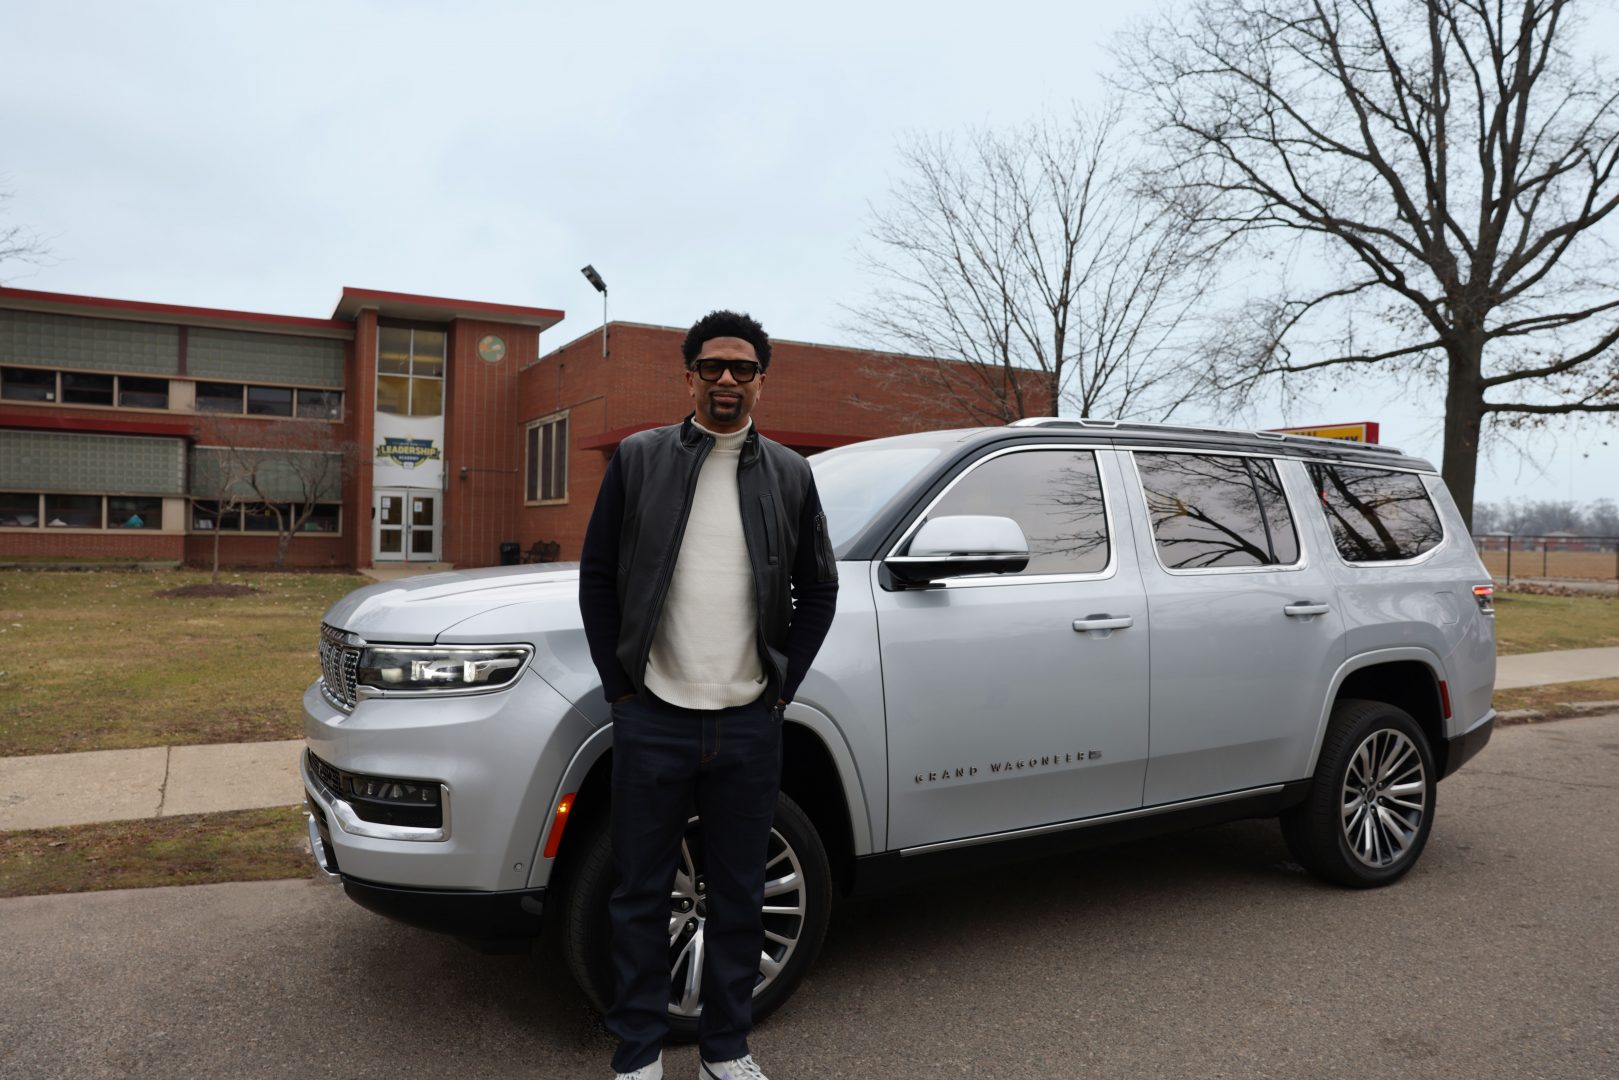 Learn how Jalen Rose's collab with Grand Wagoneer creates opportunity for Detroit students